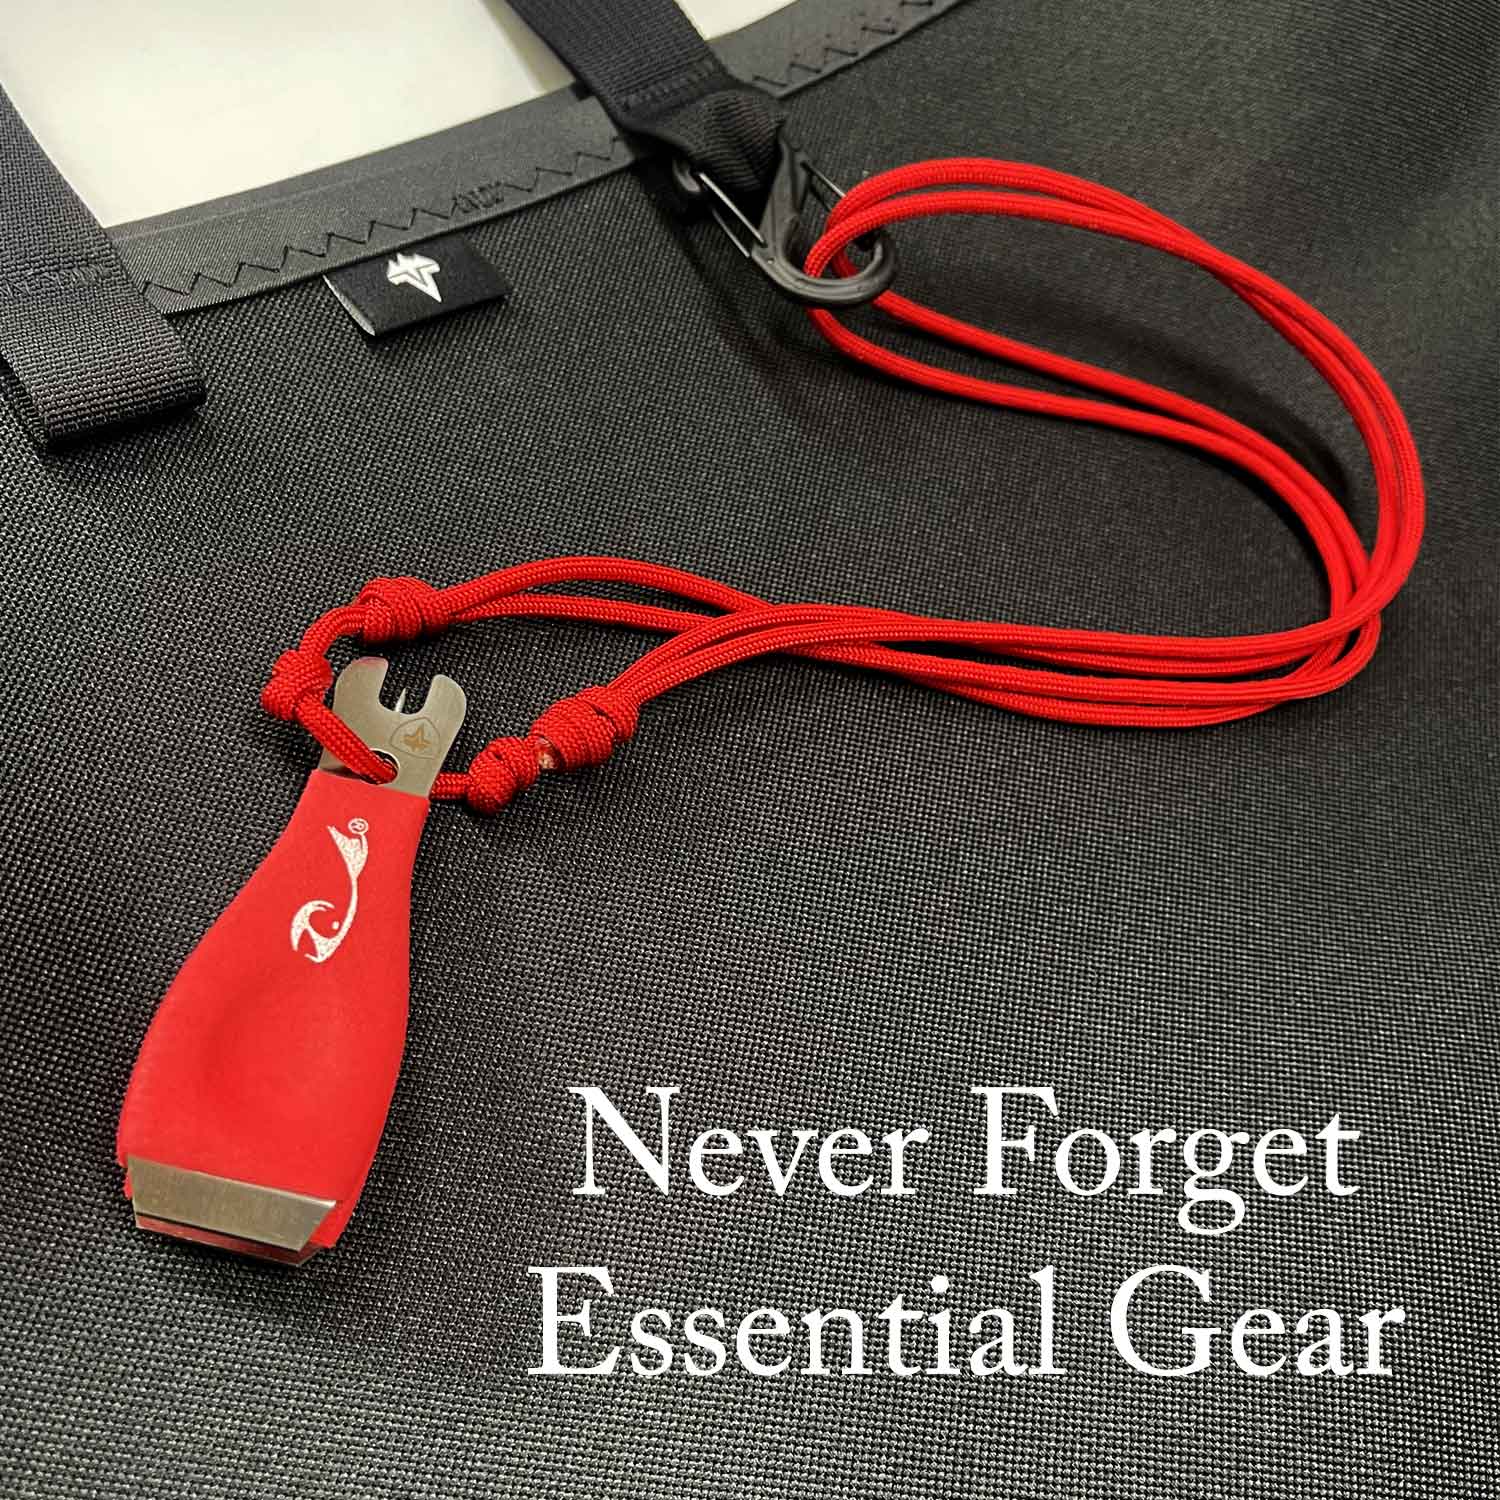 Four External gear loops for you to clip on essential gear that you don't want to forget at home - nippers, floatant, or other fly fishing tools connect easy for storage and transport